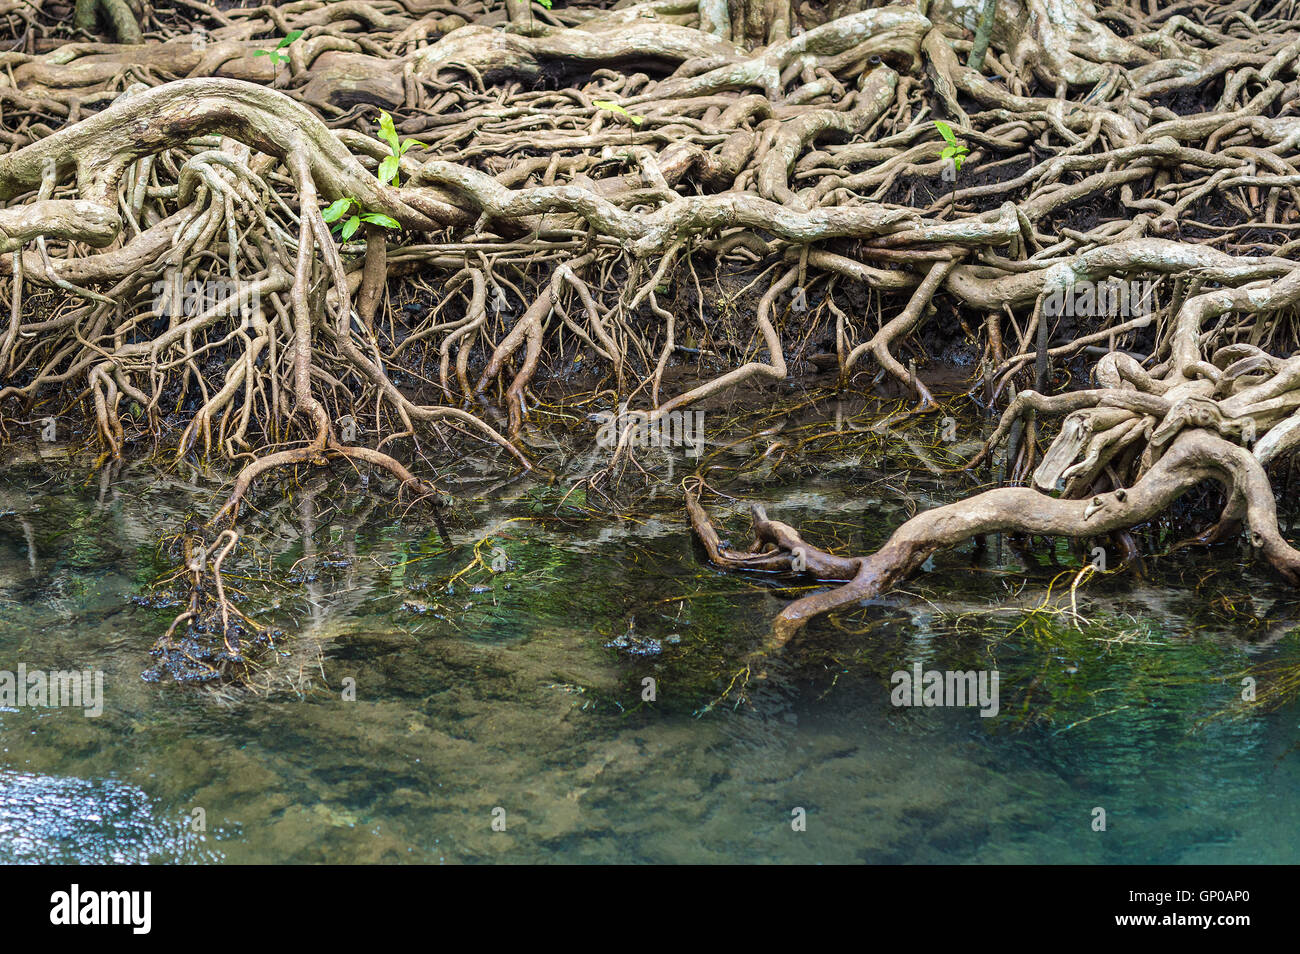 The roots of the mangrove trees, close up. Stock Photo